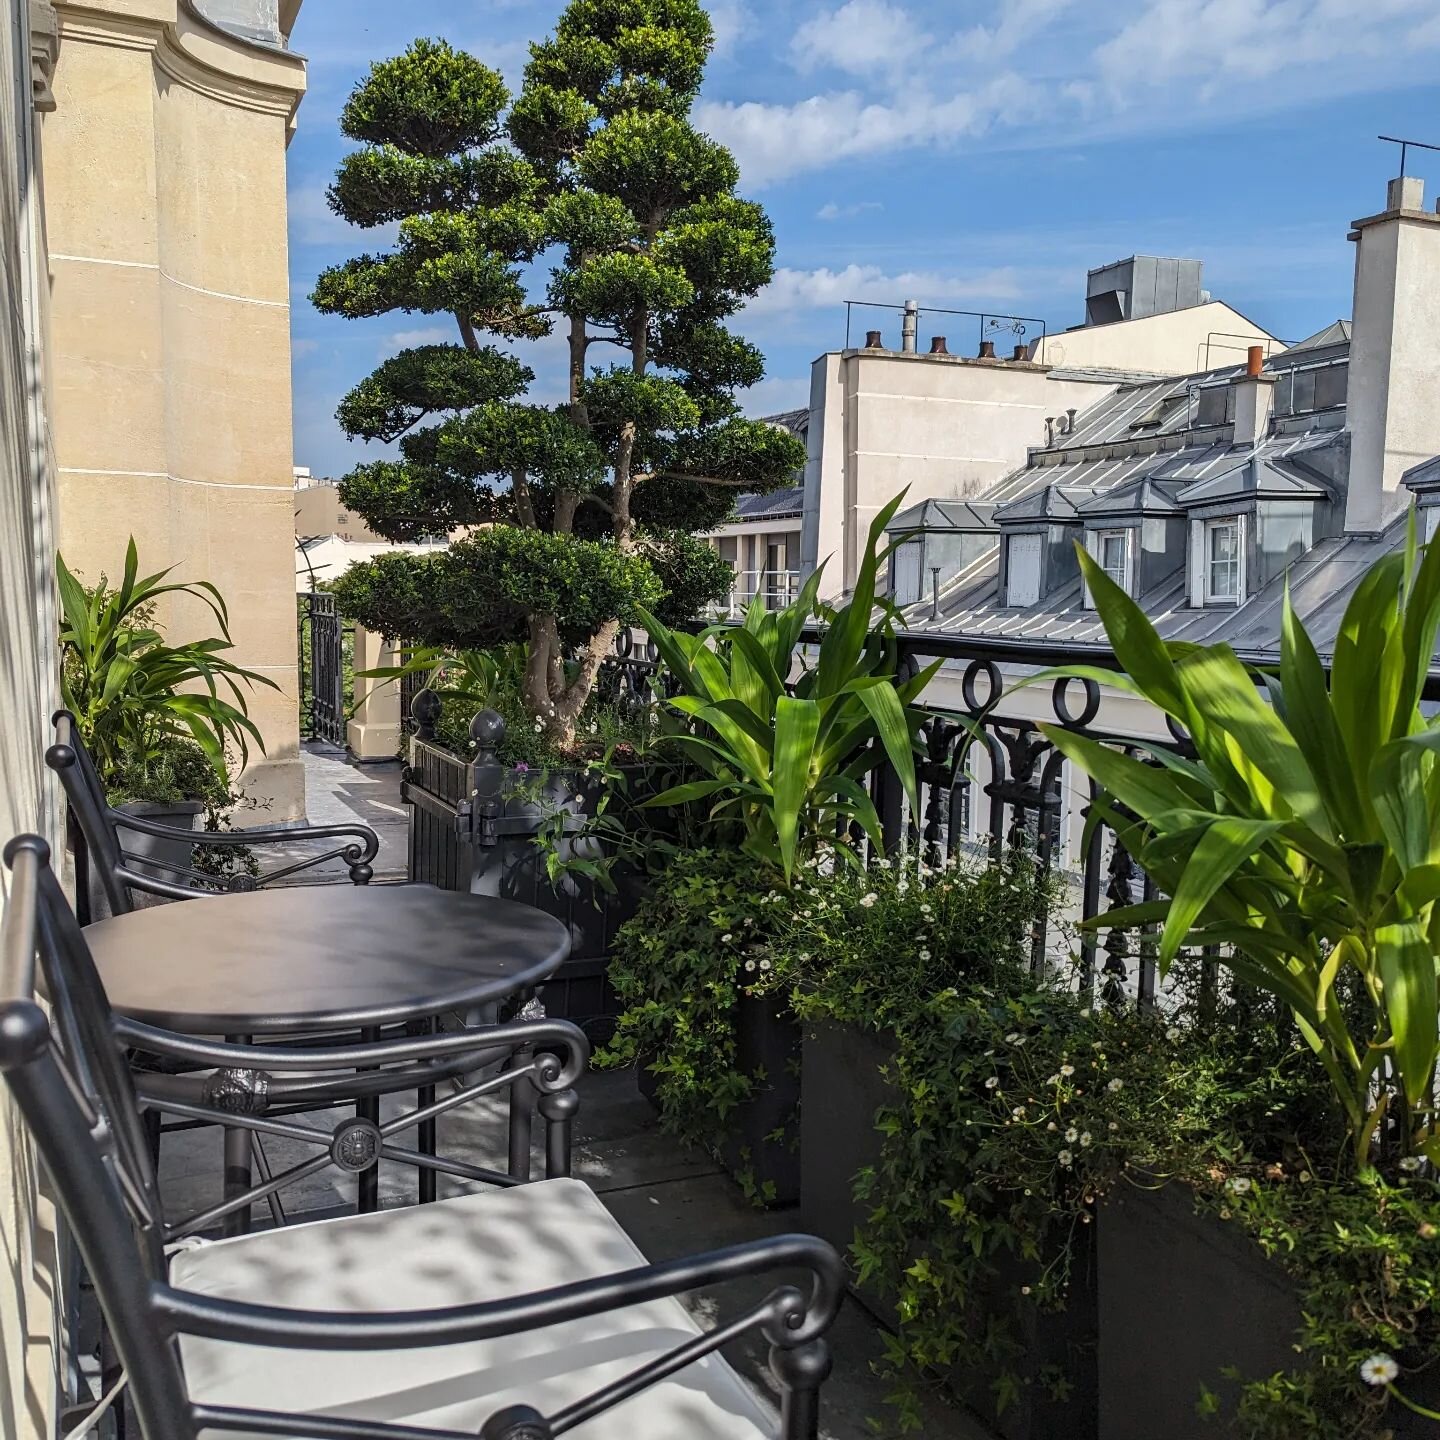 🌿 Parisian Elegance: Crafting Luxury Gardens by Simonson Landscape 🇫🇷✨

In the creative bustle of Paris, Simonson Landscape is proud to share a recent project: a classic French garden on the terrace and balcony. We were given carte blanche to crea